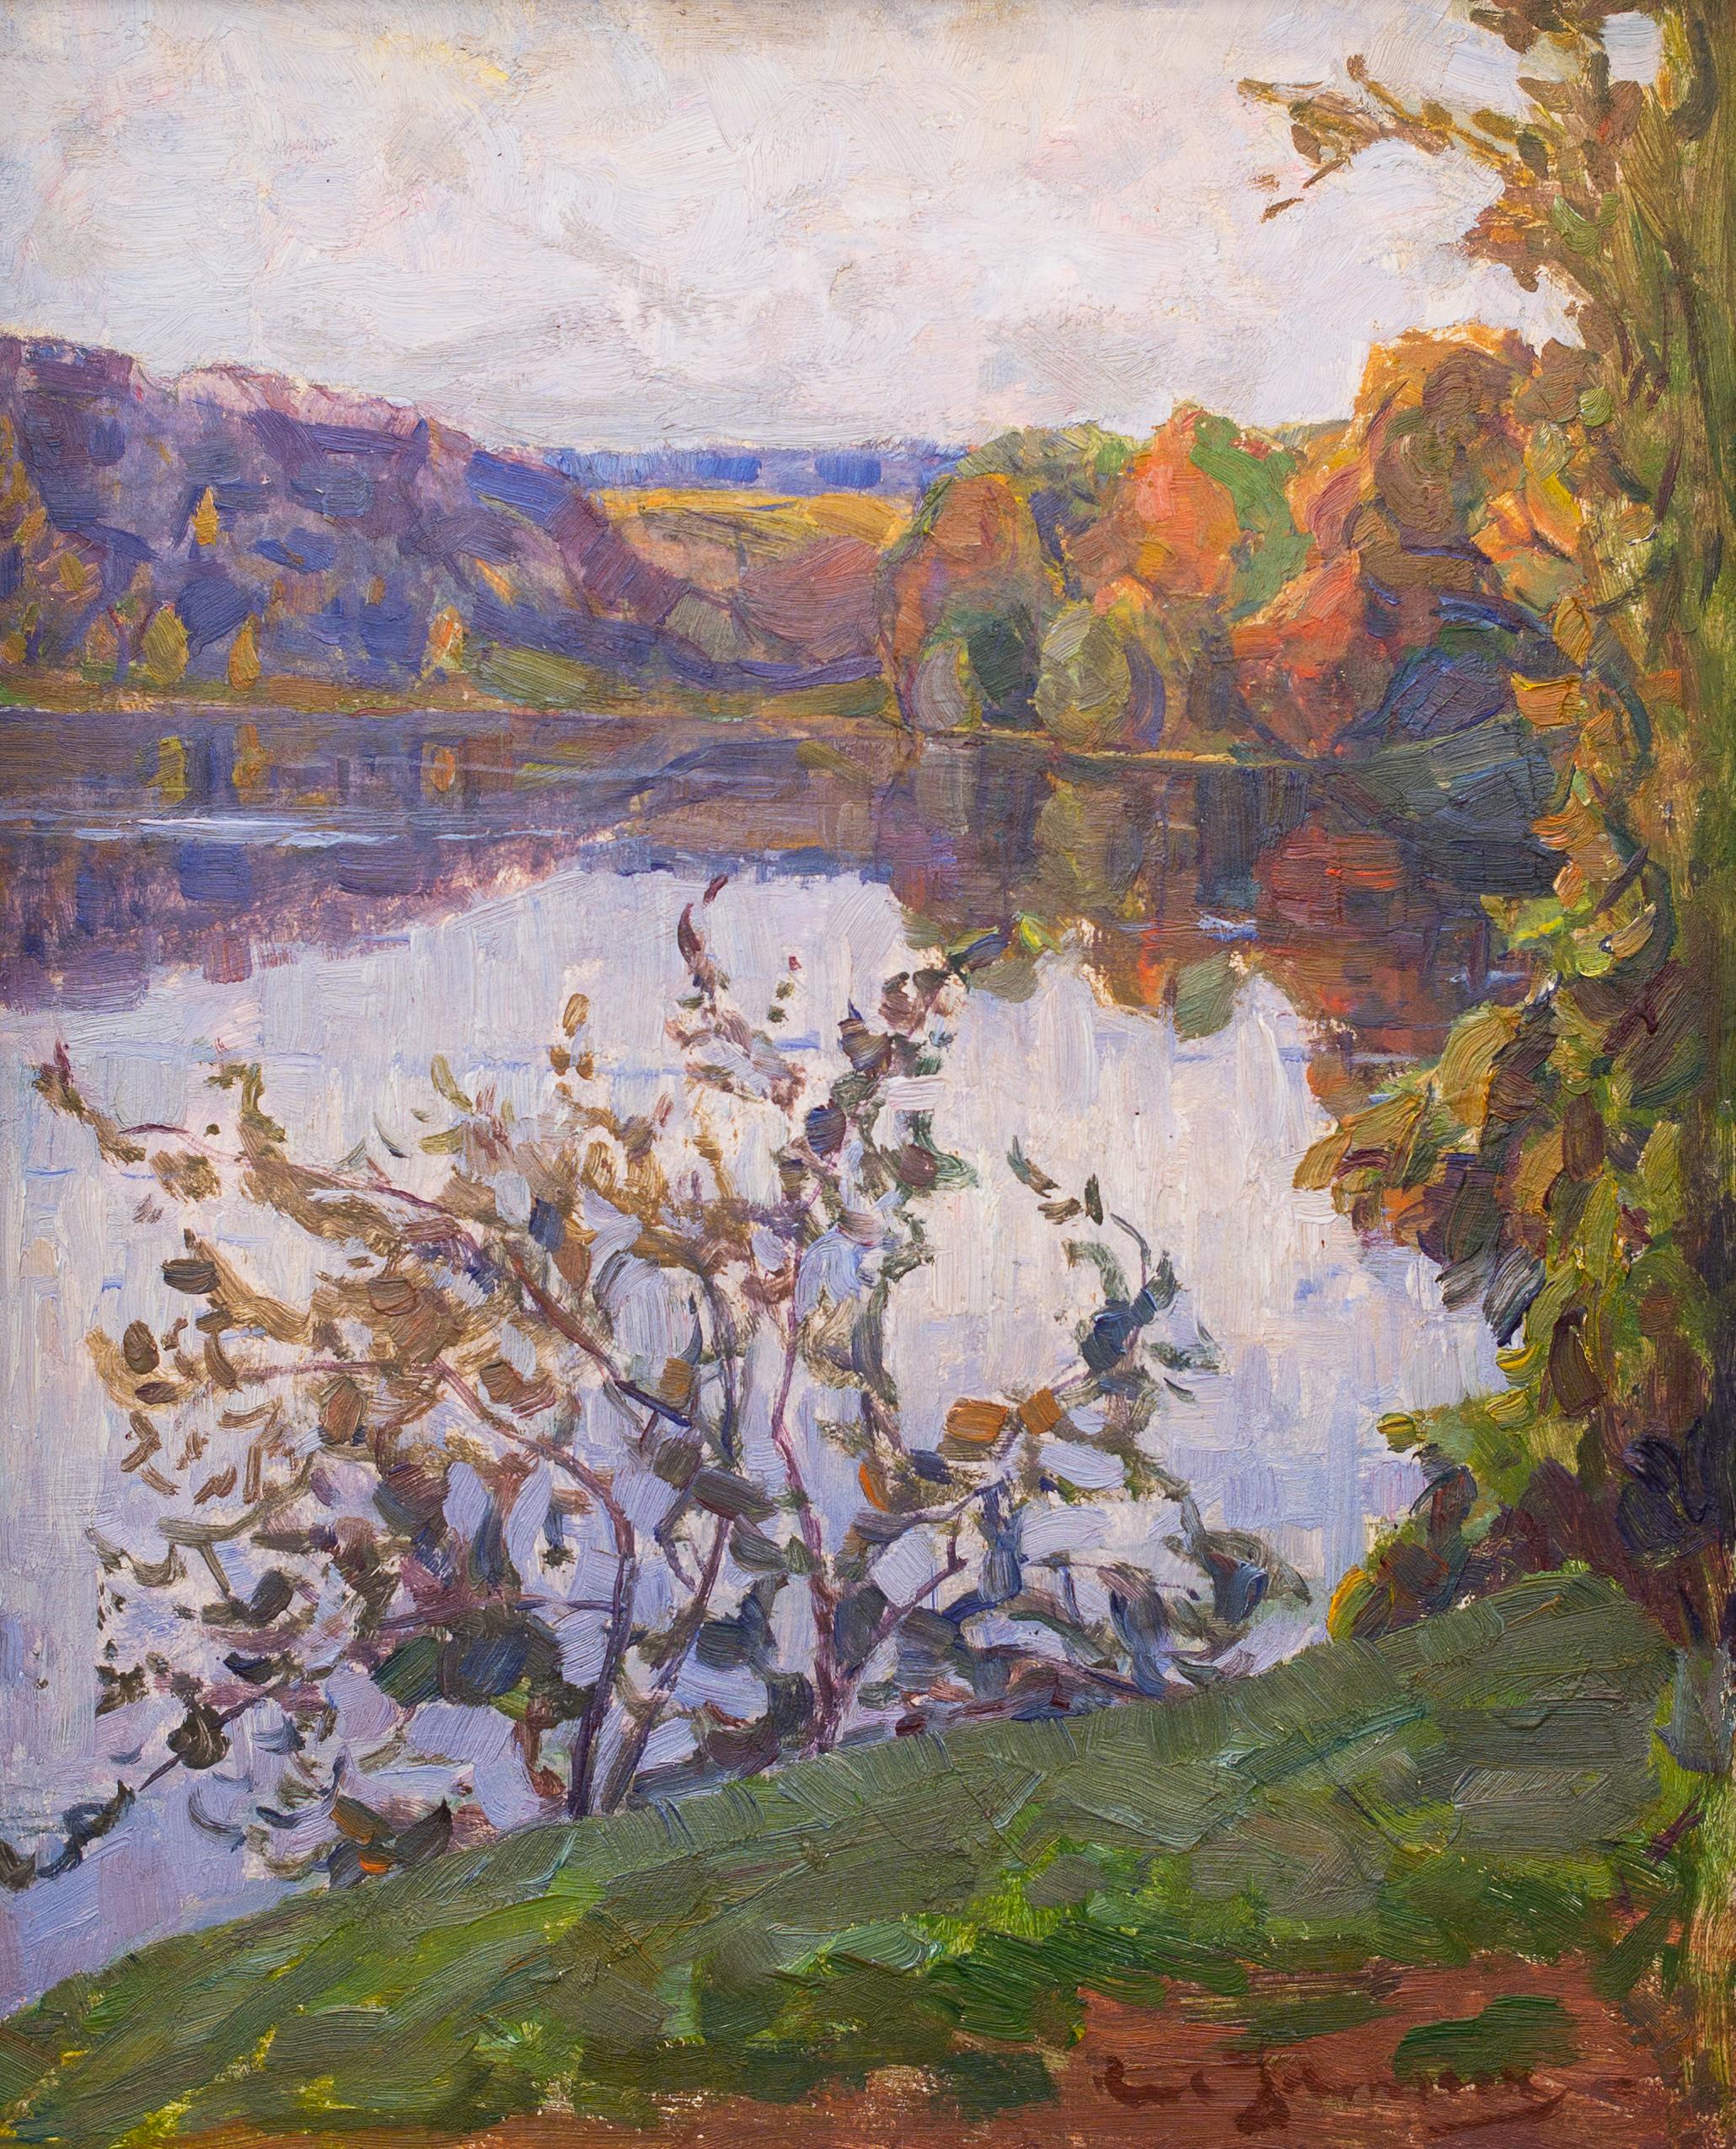 Autumn View With Calm Lake and Windswept Trees by Carl Johansson, Swedish Artist - Painting by Carl Johansson 